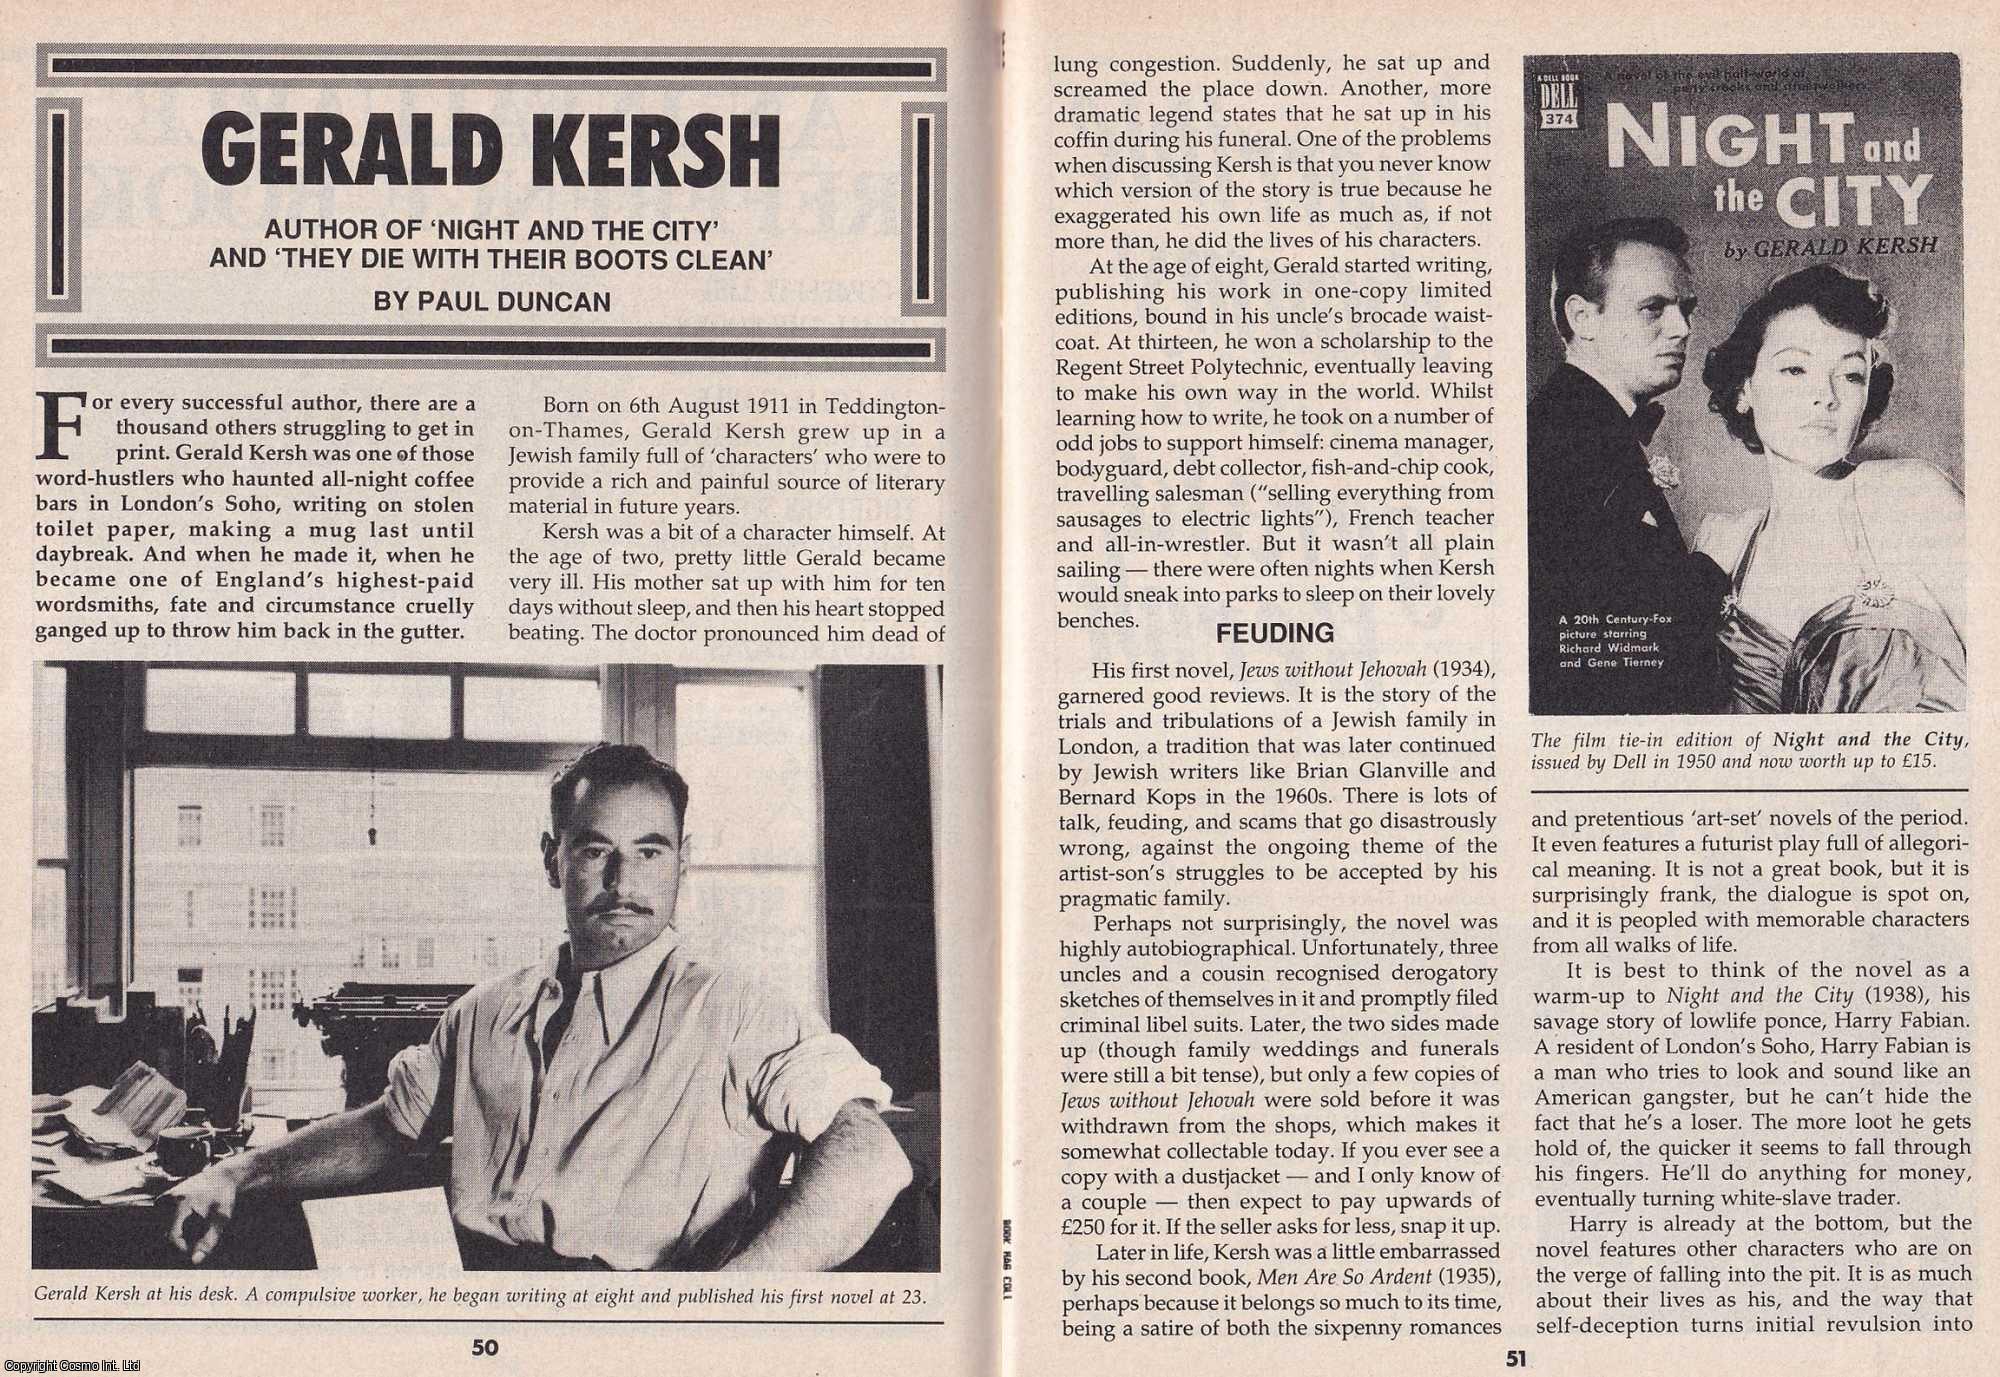 Paul Duncan - Gerald Kersh. Author of Night and The City. This is an original article separated from an issue of The Book & Magazine Collector publication.